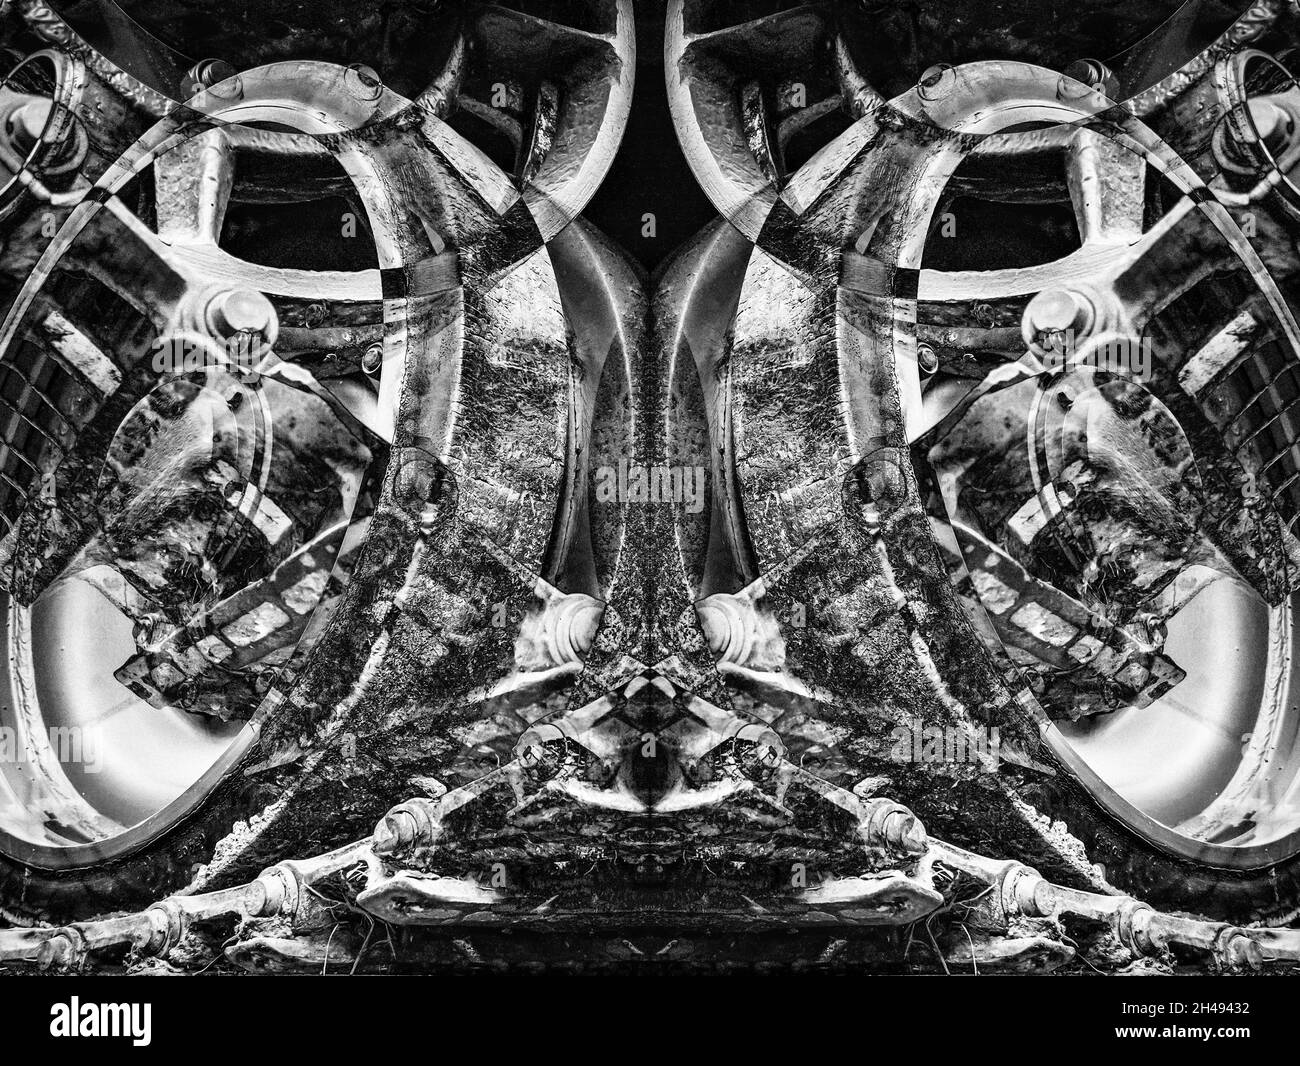 Abstract montage of tank caterpillar tracks, multiple exposures, overlapping in Black and White Stock Photo